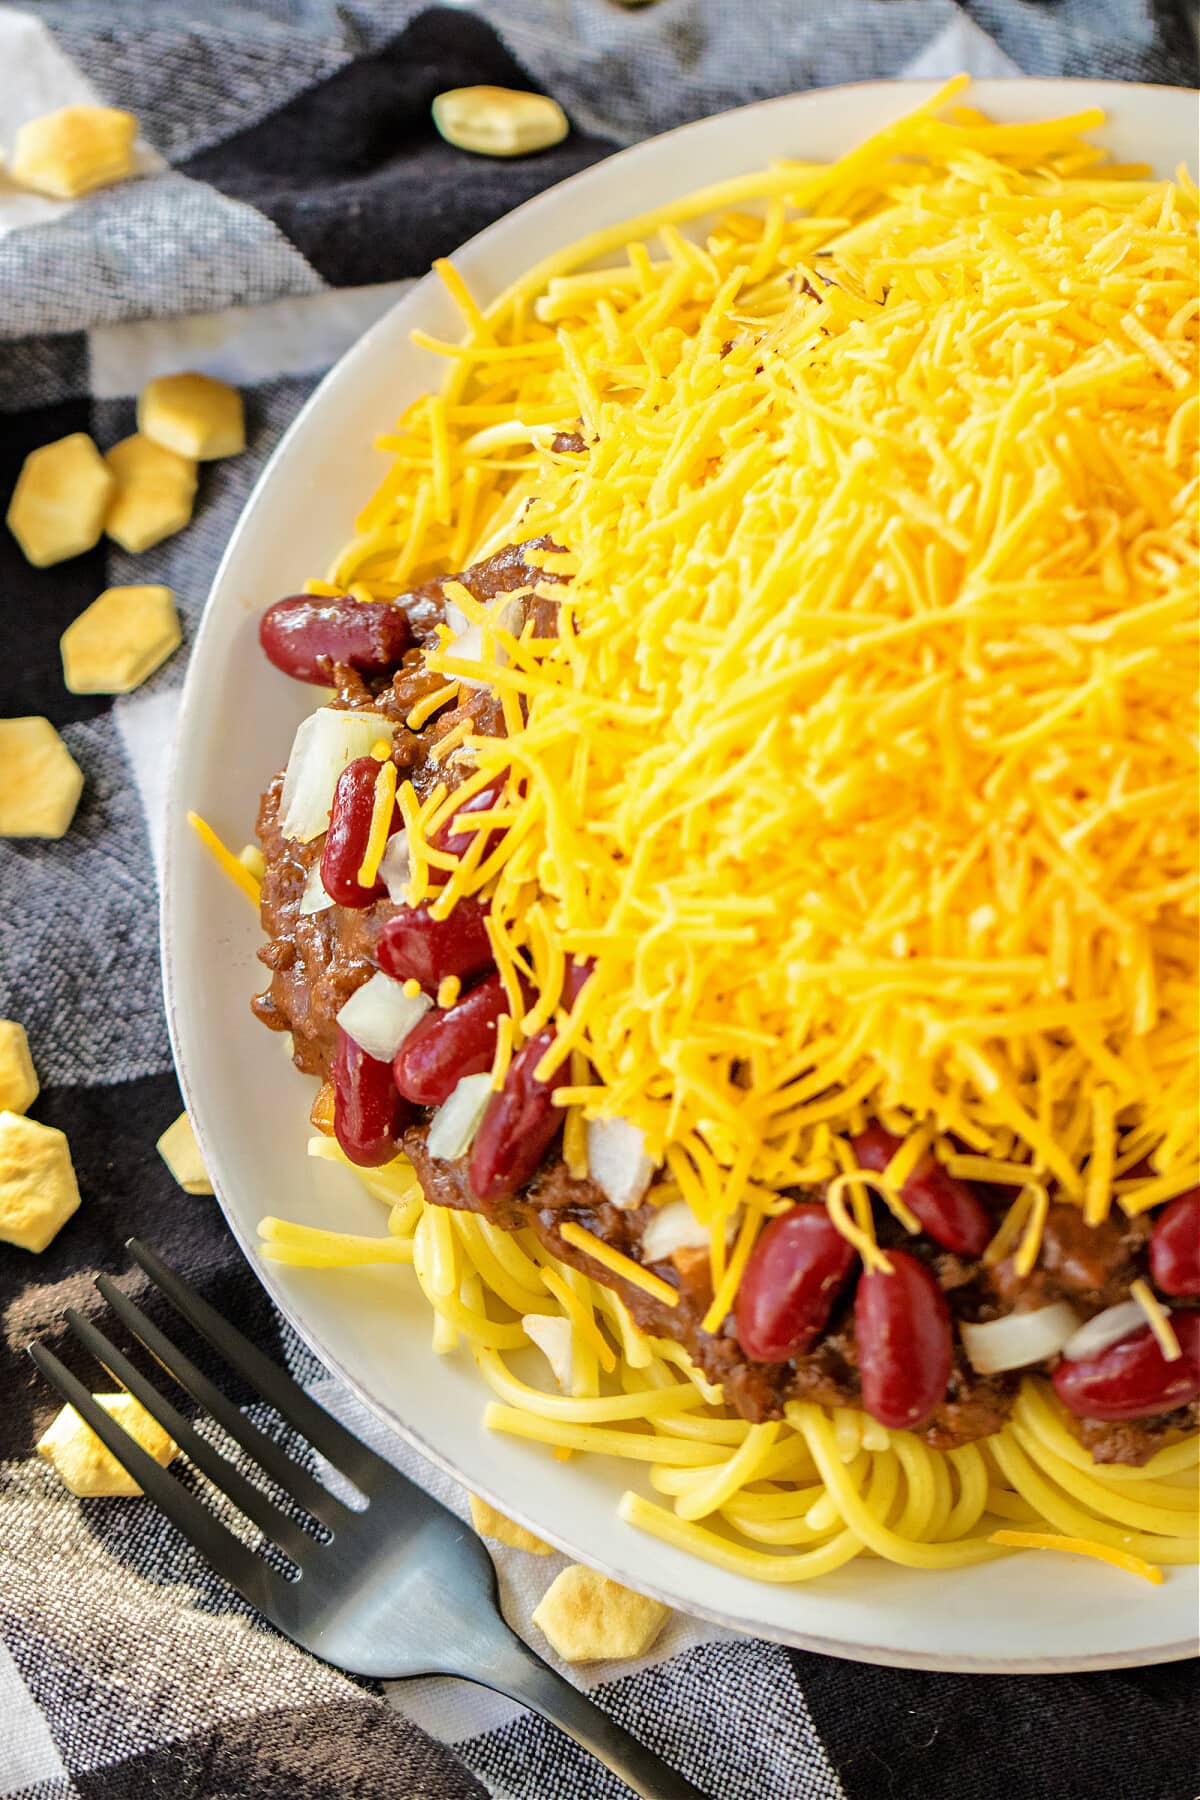 chili with spaghetti, beans, onions and cheese on a white plate